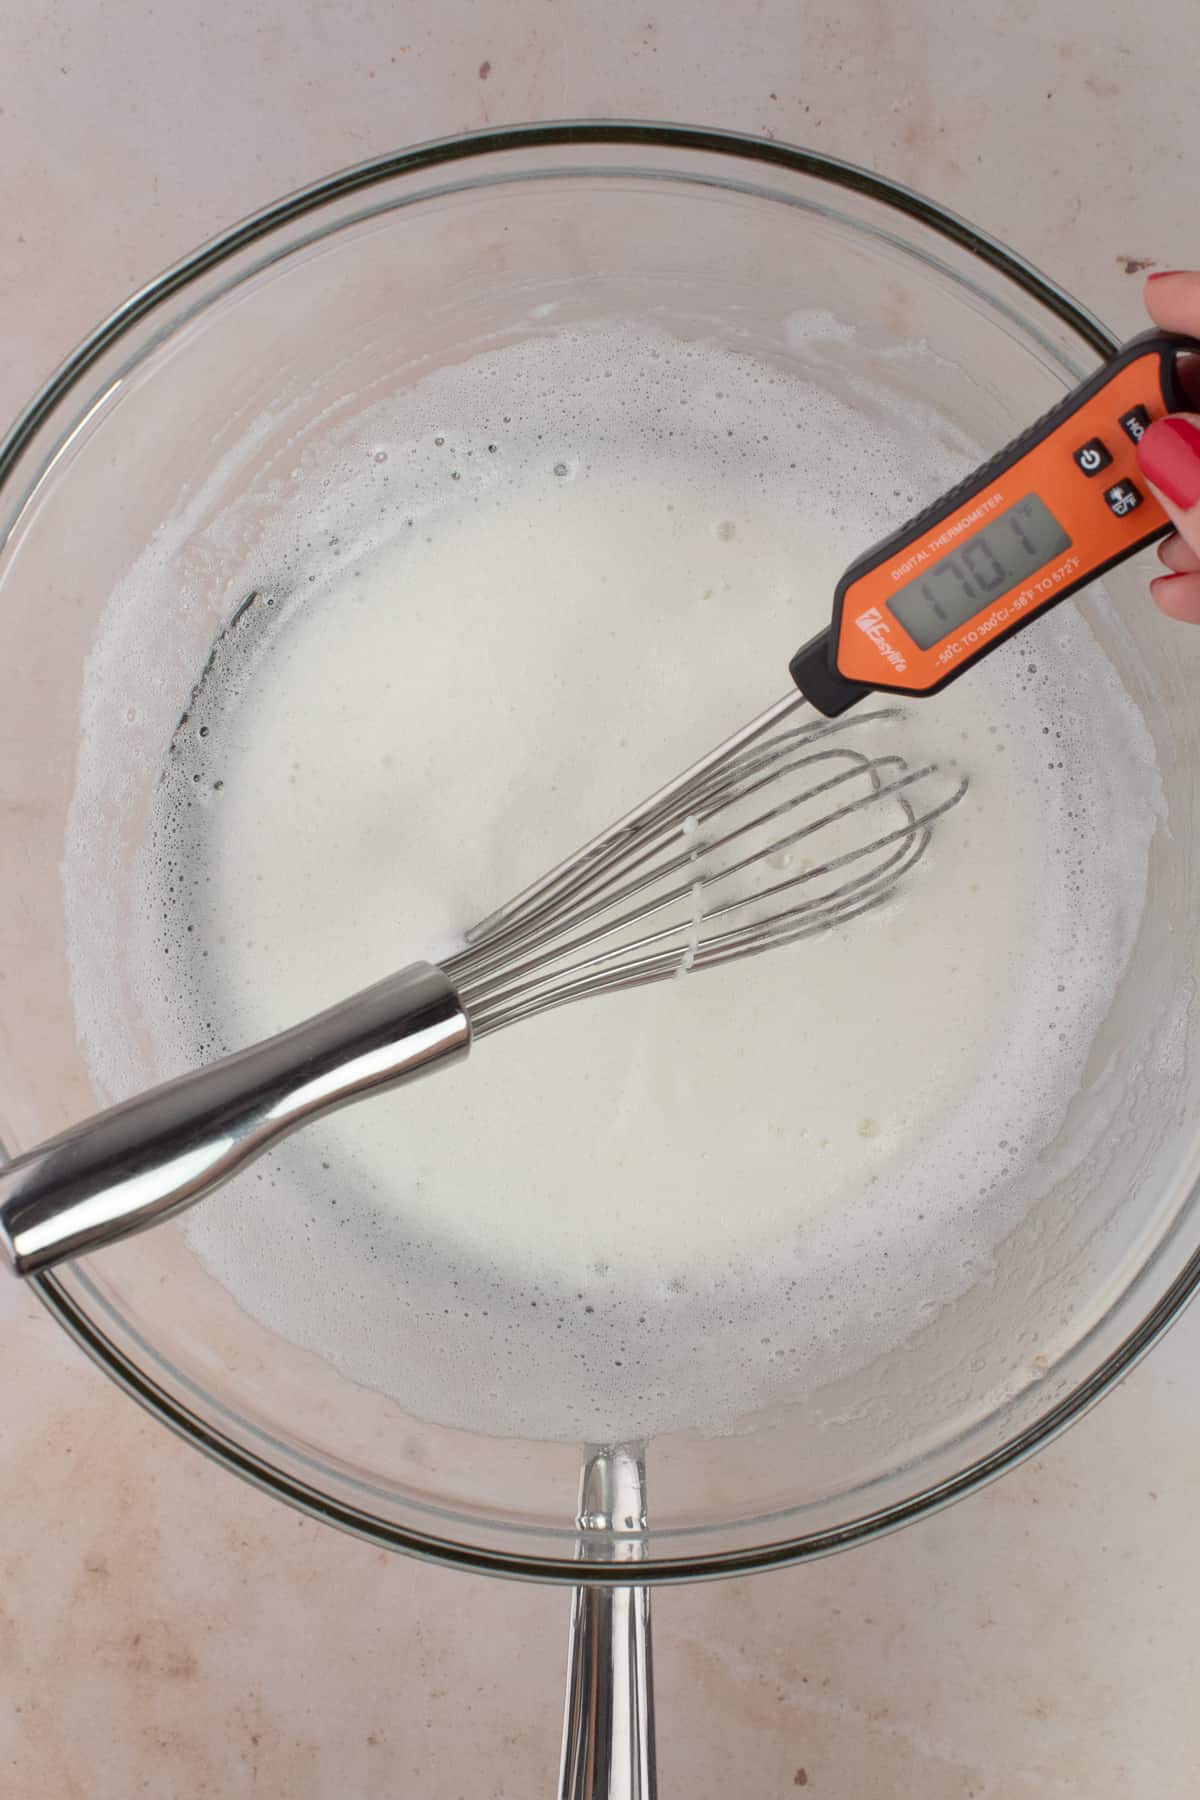 Egg whites, sugar and cream of tartar are cooked until it reaches 170ºF